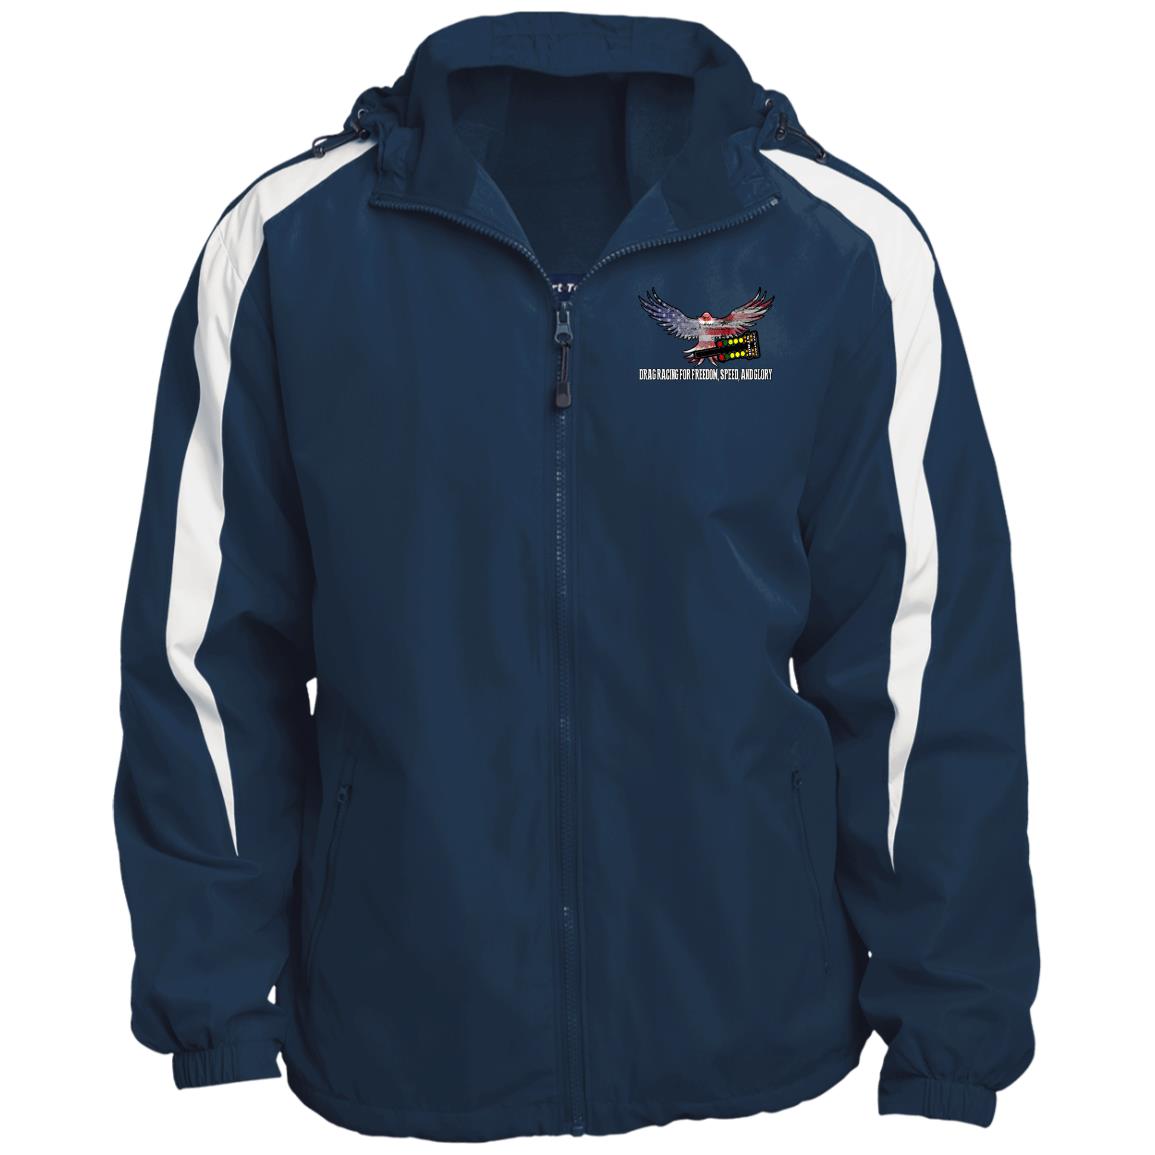 Drag Racing for Freedom, Speed, and Glory Fleece Lined Colorblock Hooded Jacket